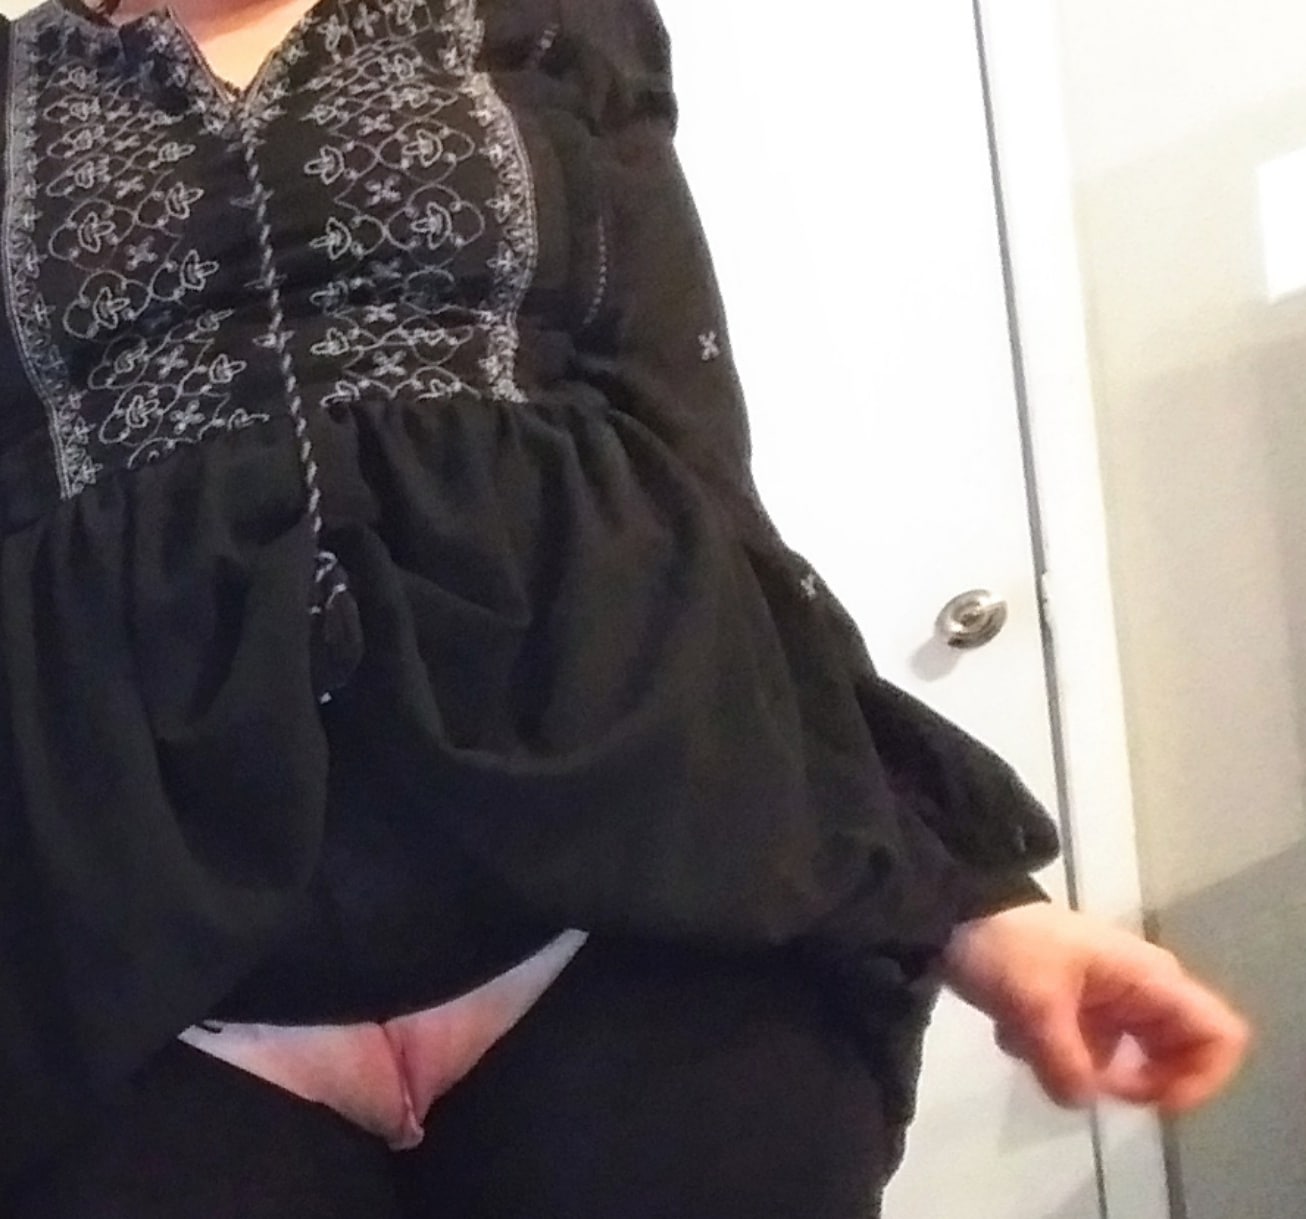 Nice comfy outfit real nudity pussy flash